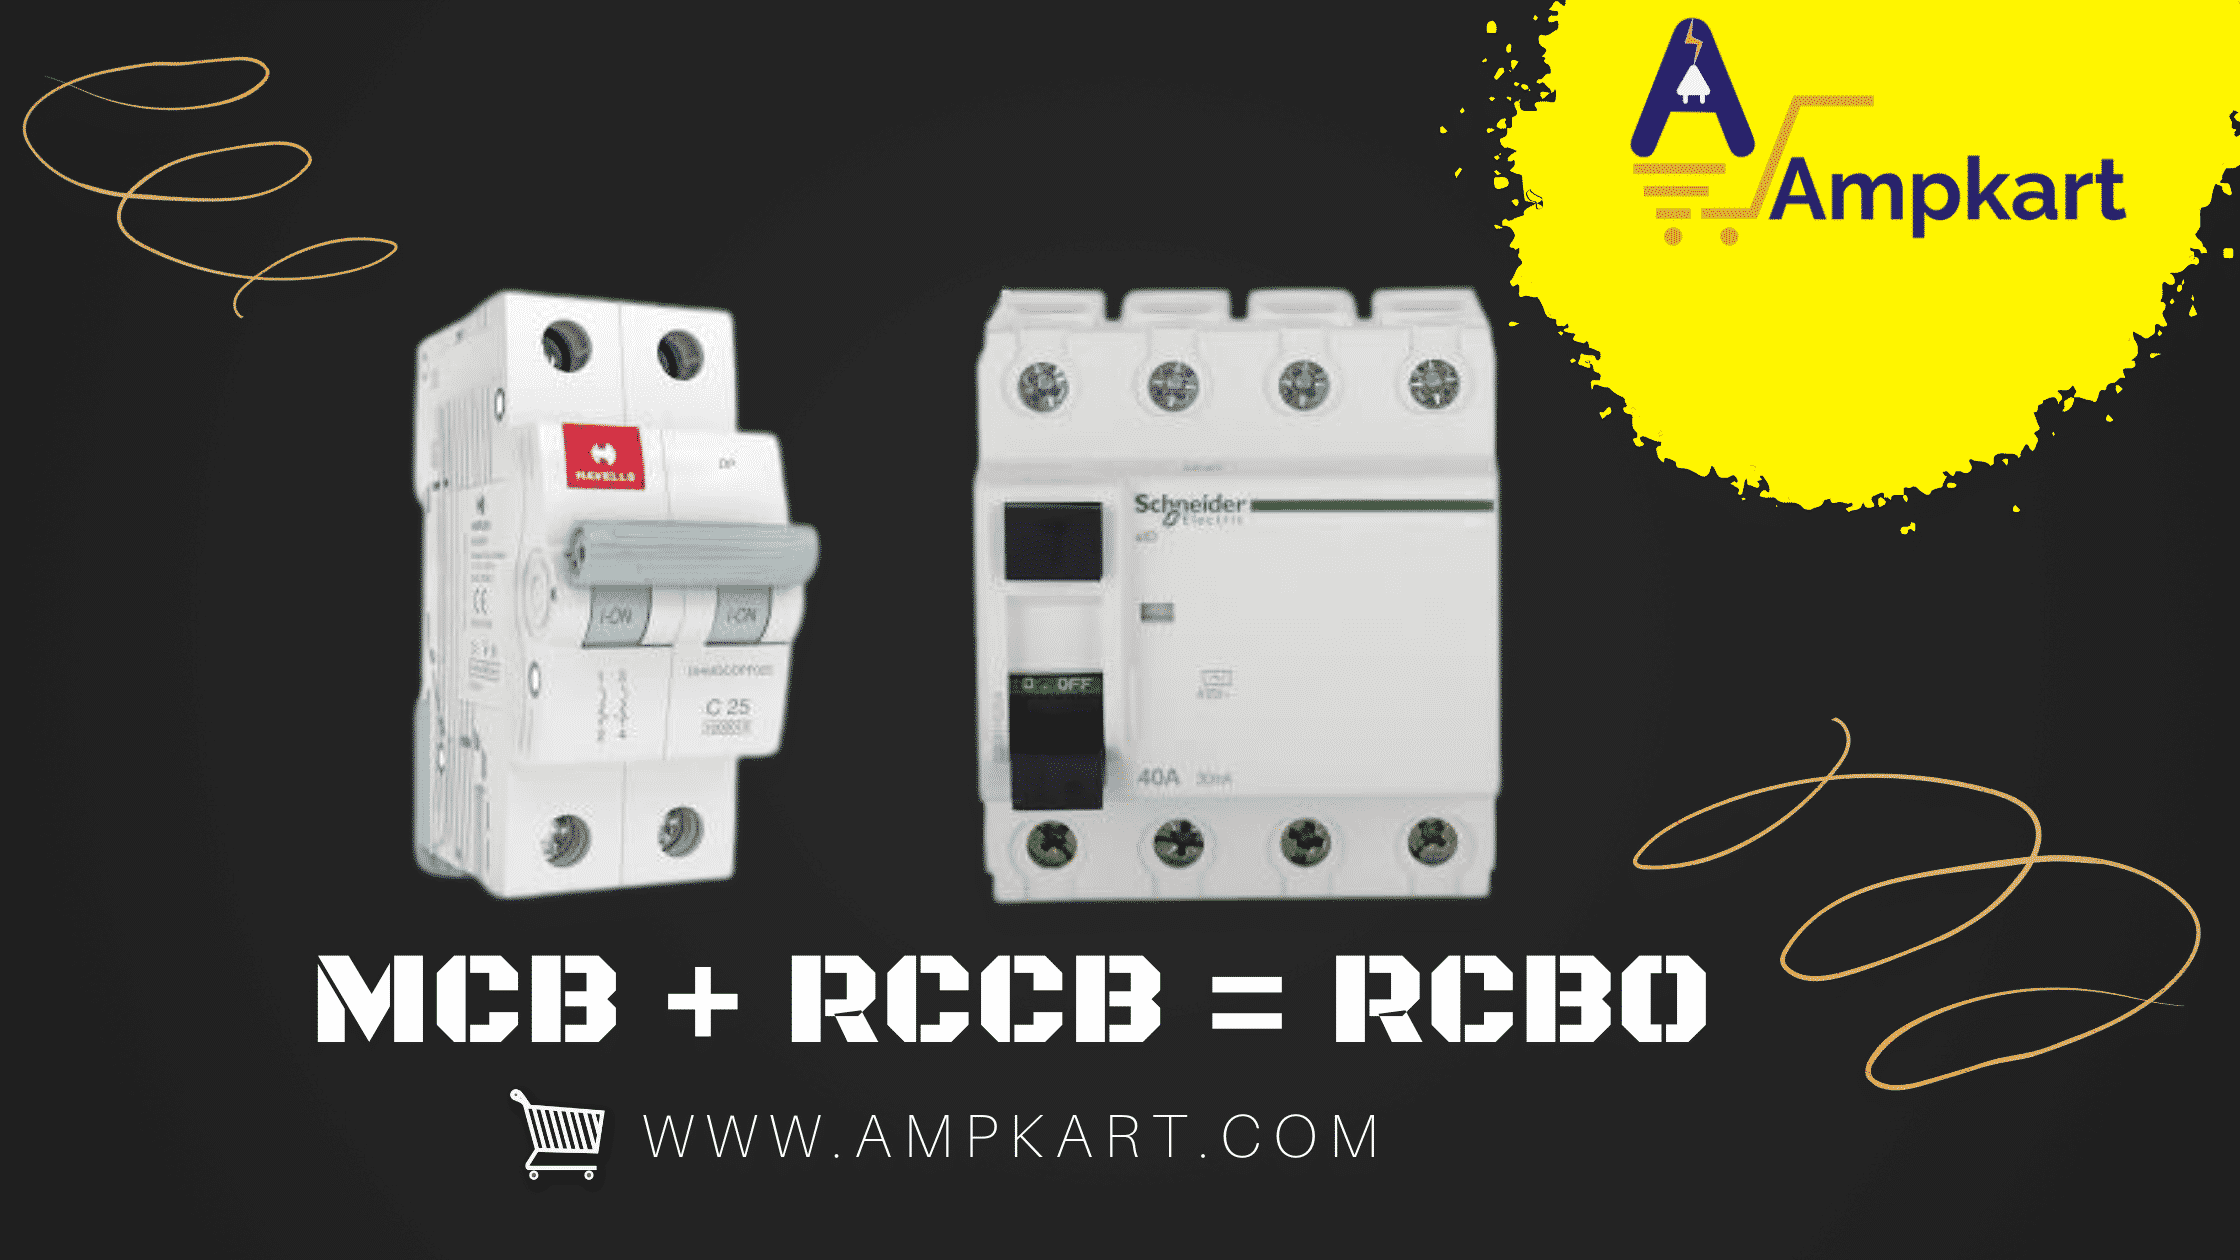 What Are The Categories And Advantages Of RCBO?